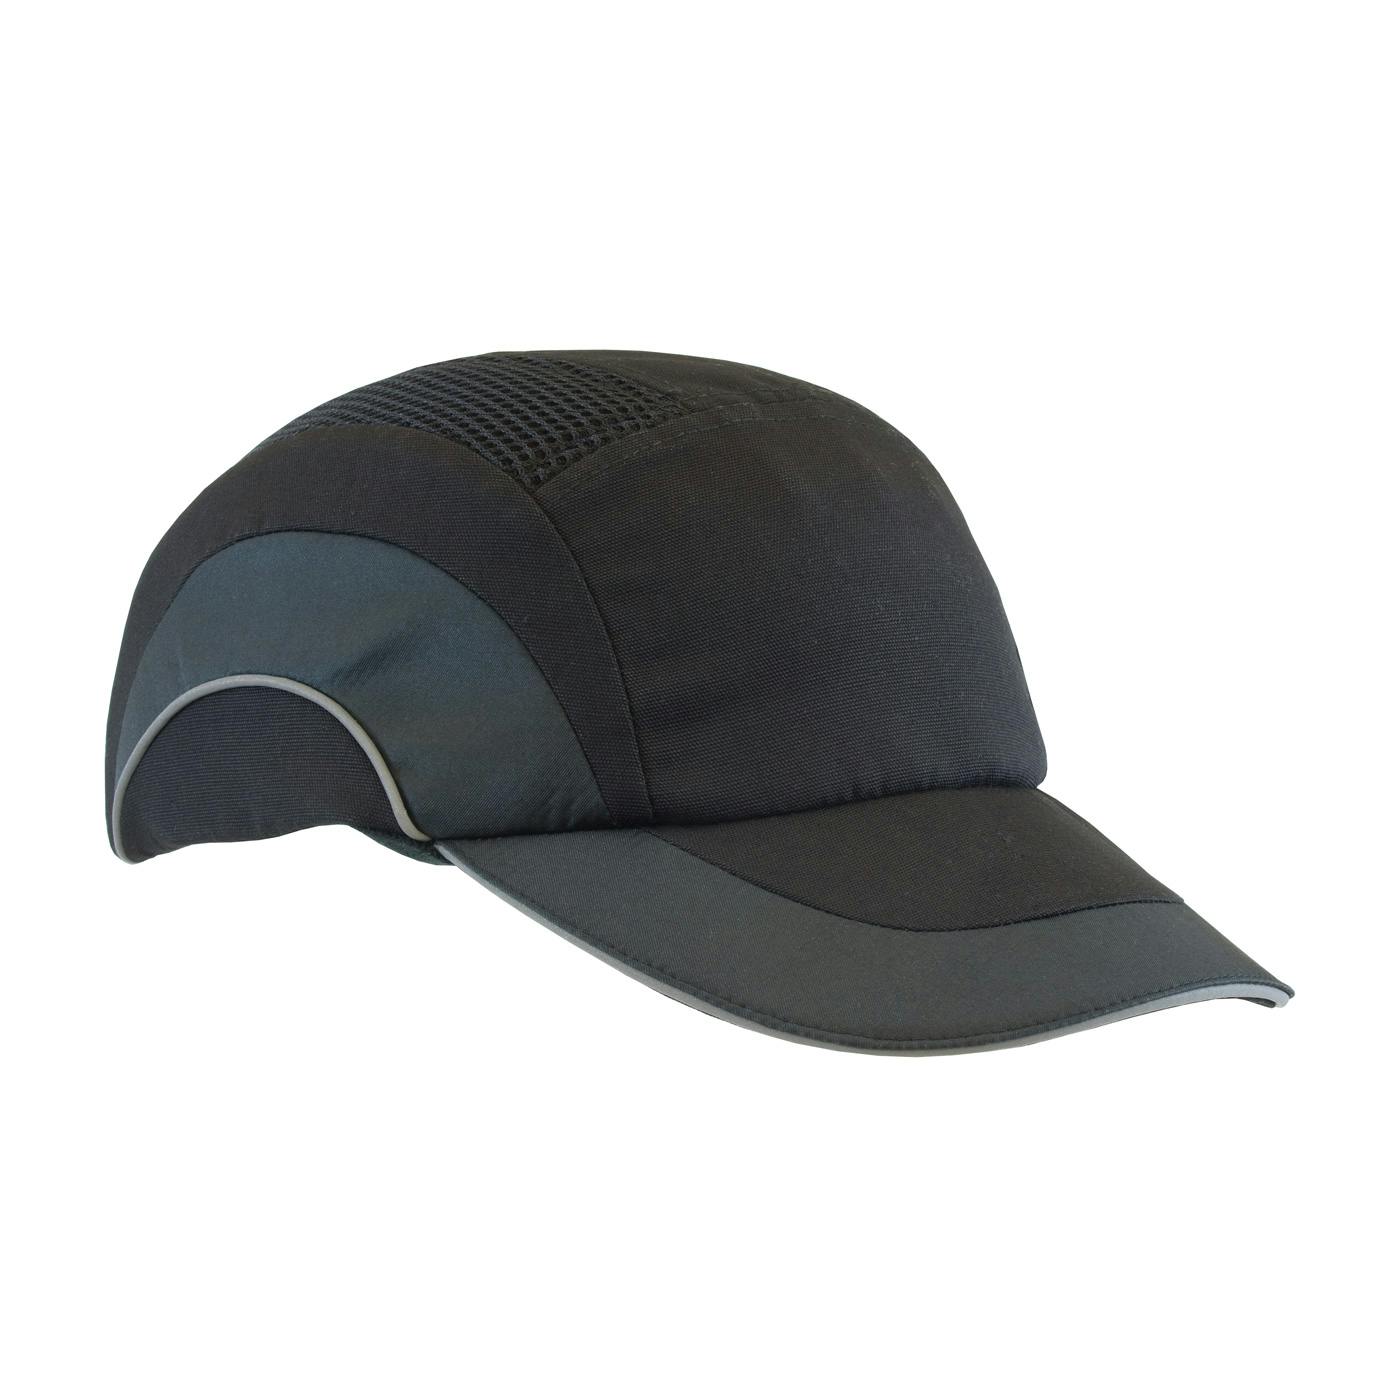 HardCap A1+™ Baseball Style Bump Cap with HDPE Protective Liner and Adjustable Back (282-ABR170)